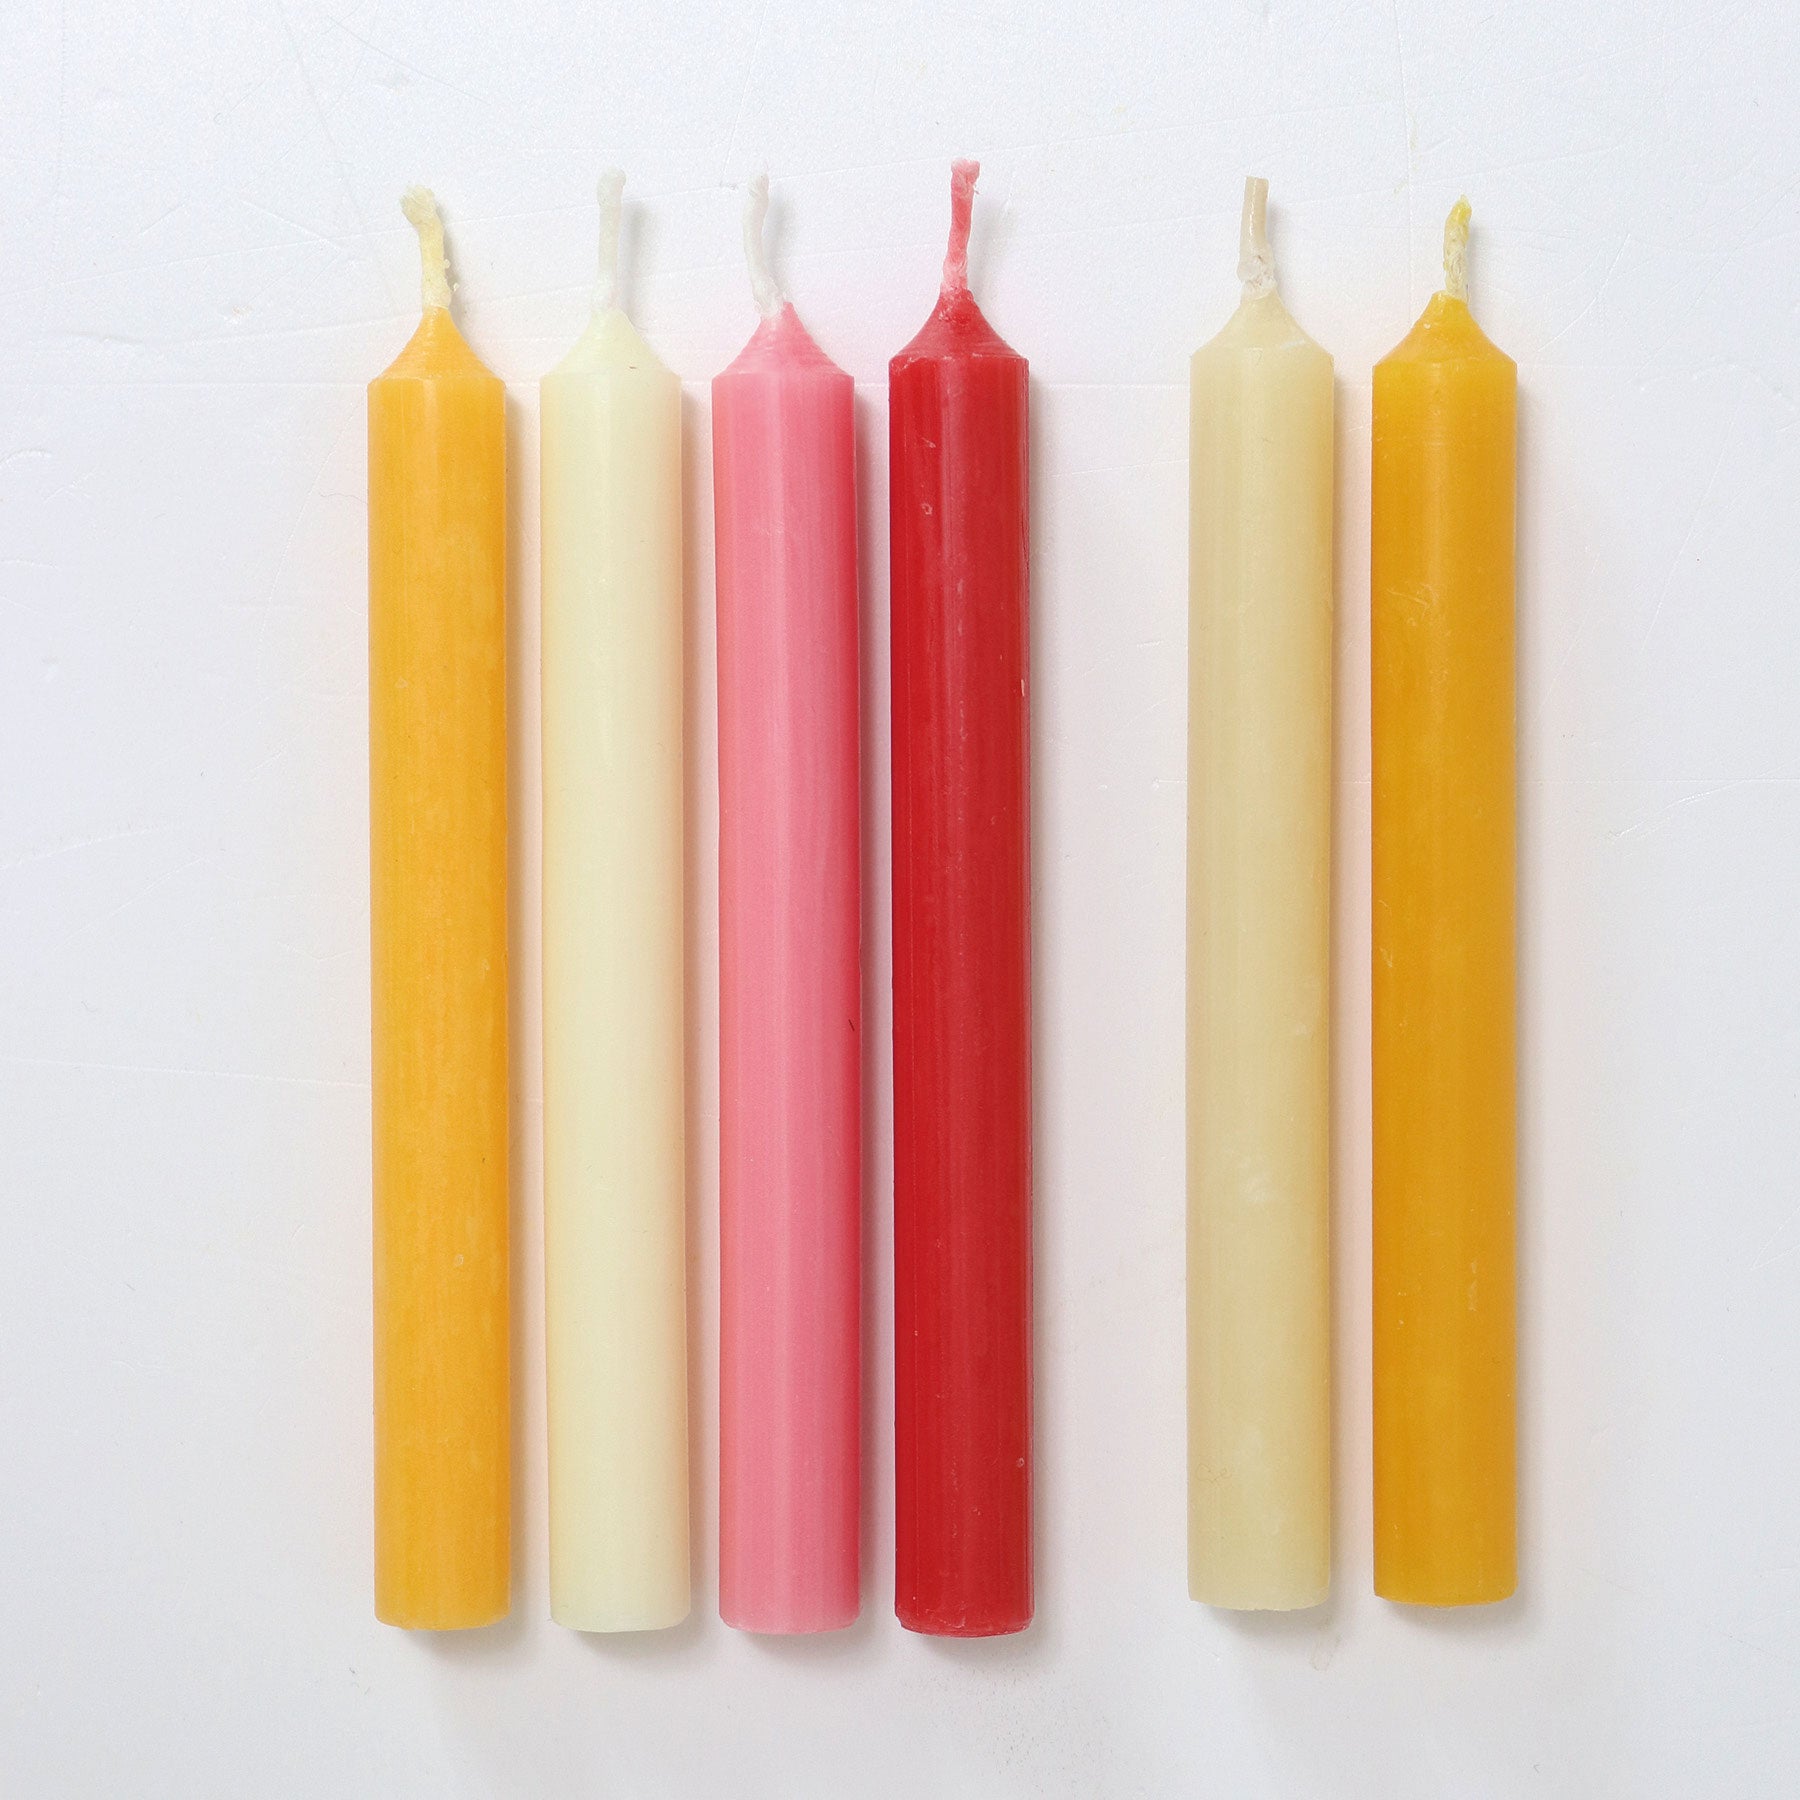 Grimm's Red Beeswax Candles (10%) 12 pcs.